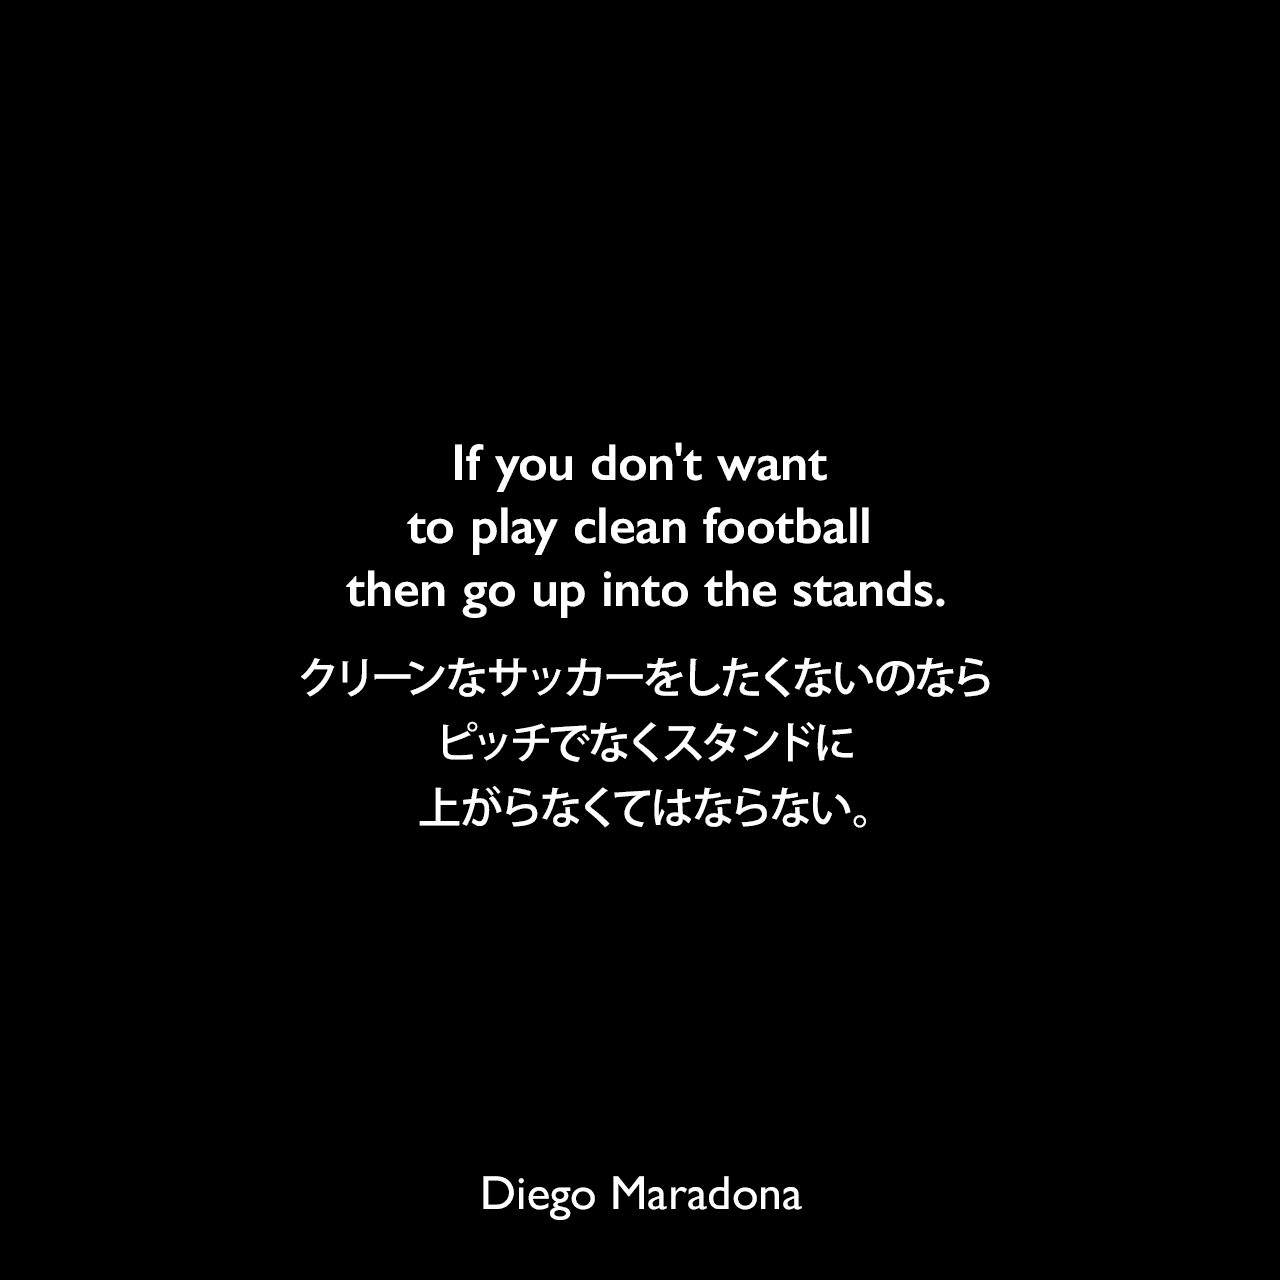 If you don't want to play clean football then go up into the stands.クリーンなサッカーをしたくないのなら、ピッチでなくスタンドに上がらなくてはならない。Diego Maradona